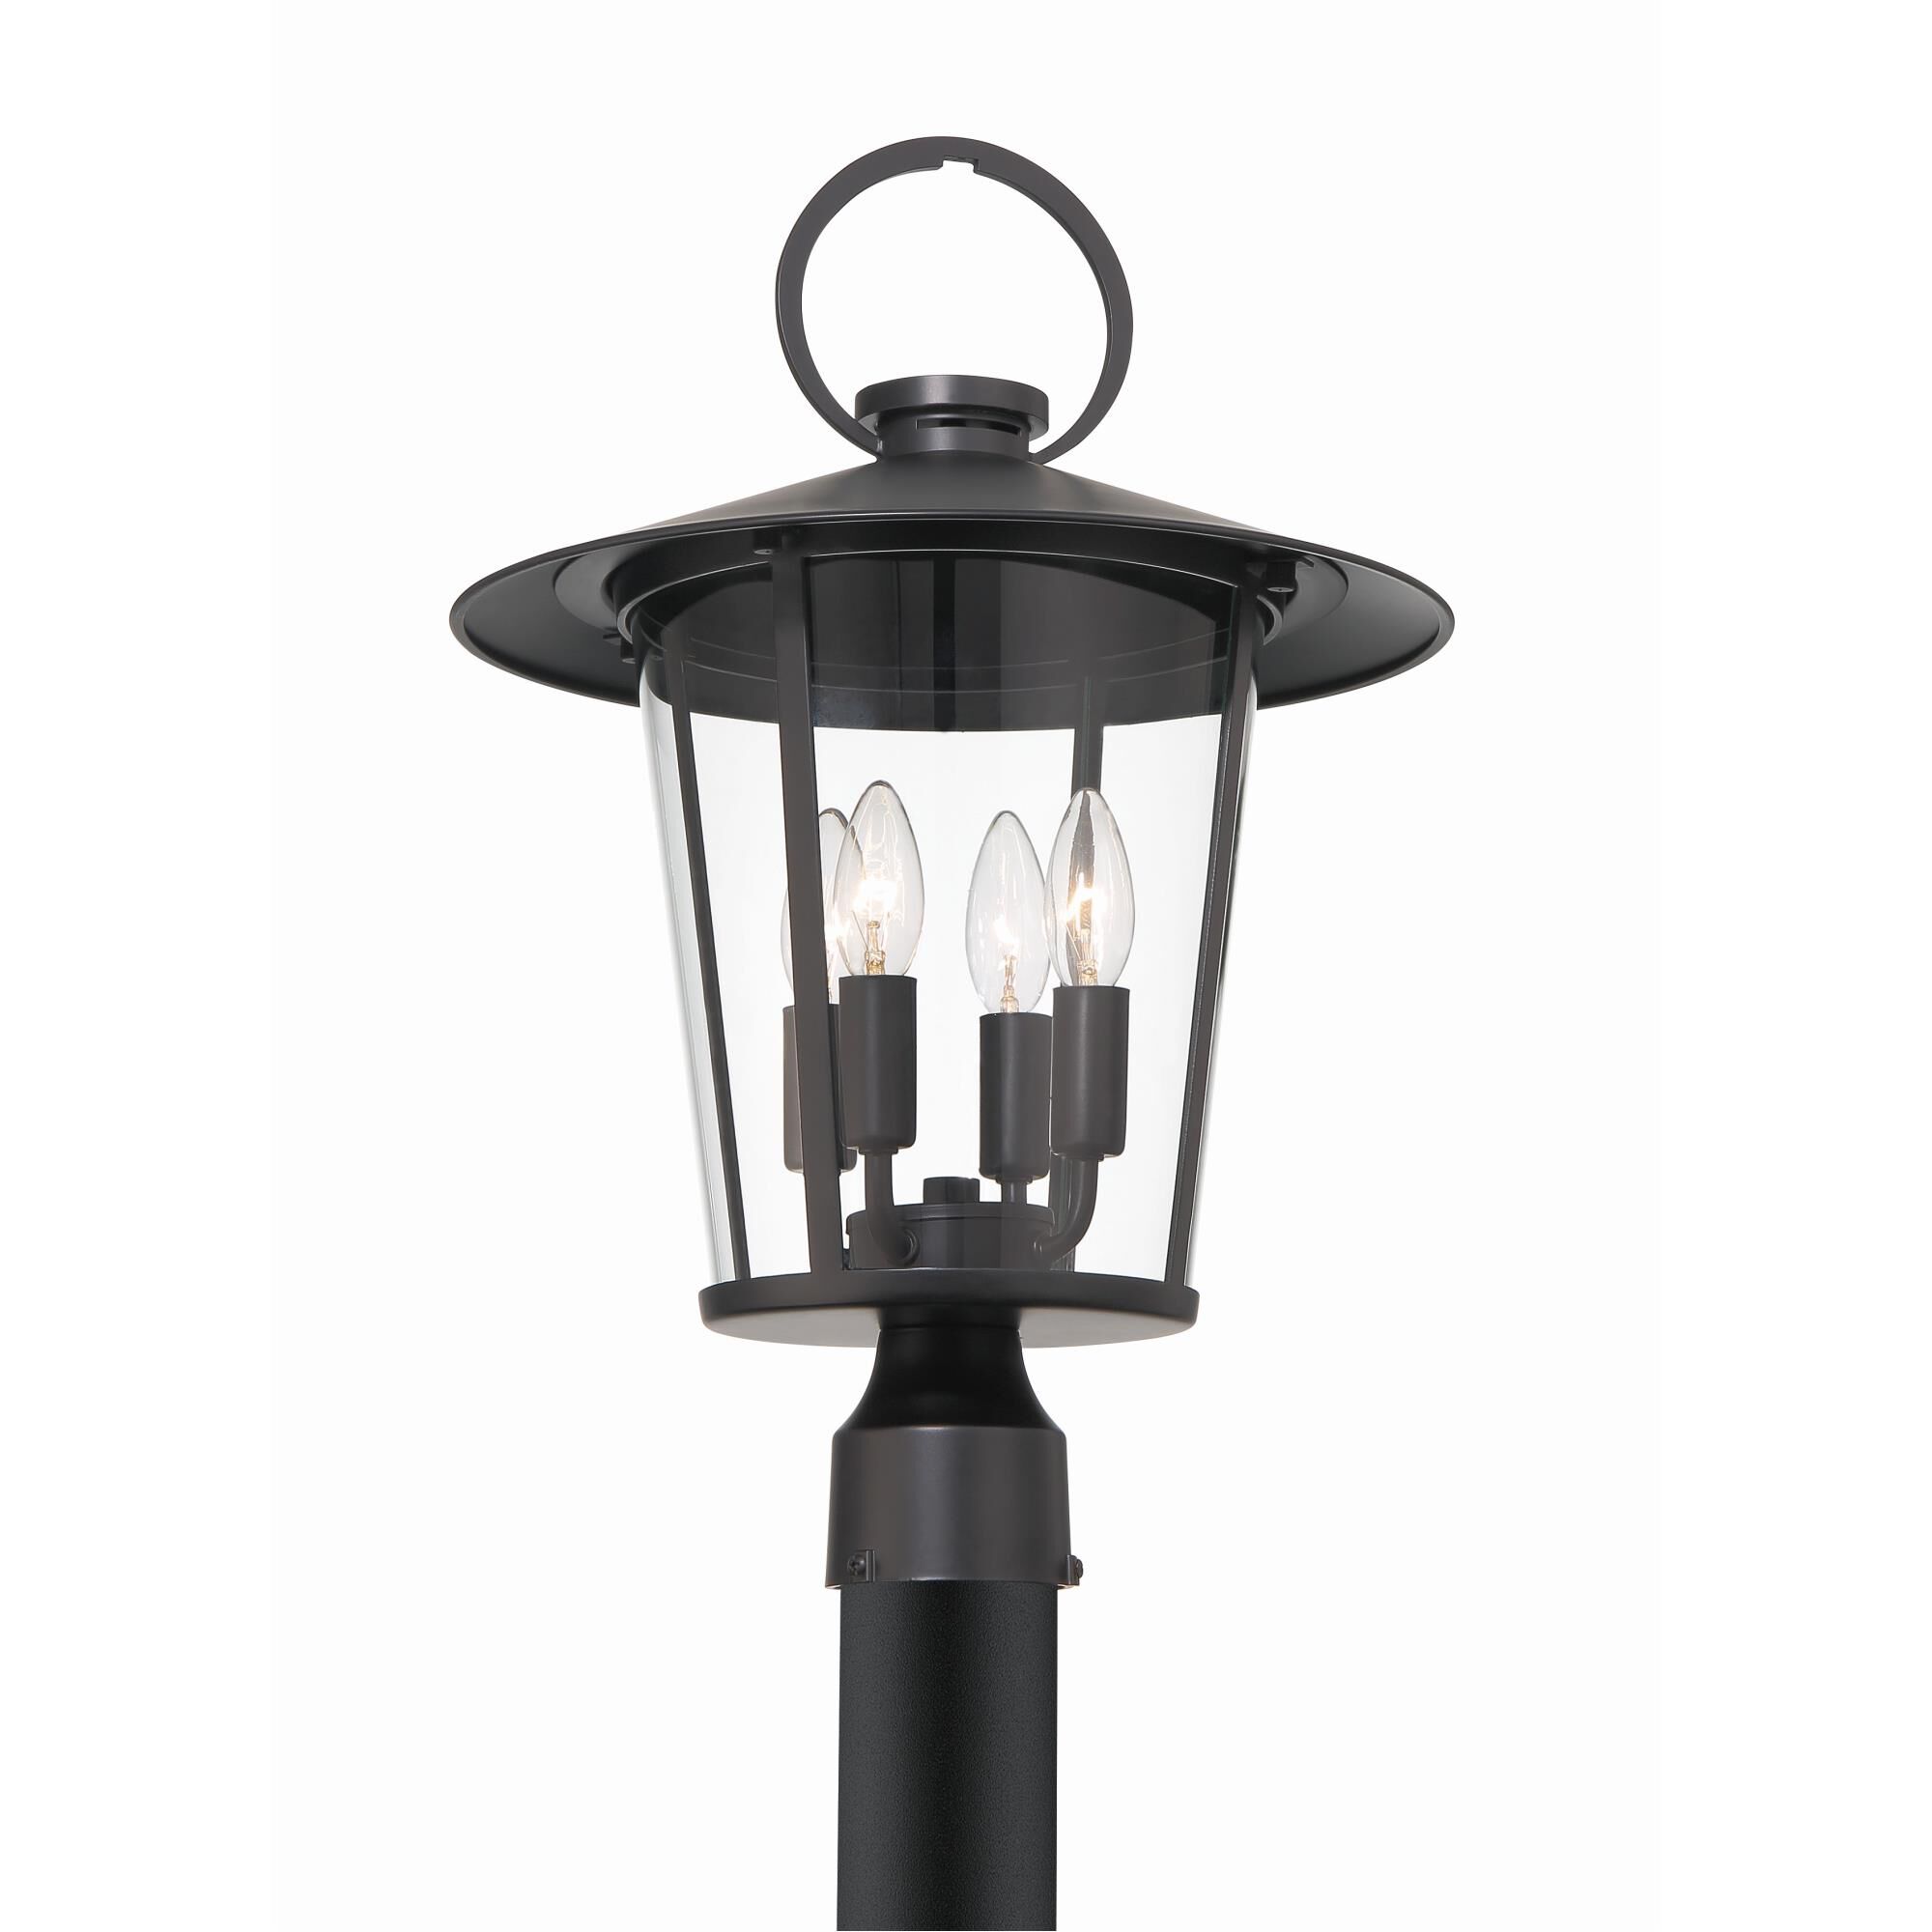 Photos - Floodlight / Garden Lamps Crystorama Andover 20 Inch Tall 4 Light Outdoor Post Lamp Andover - AND-92